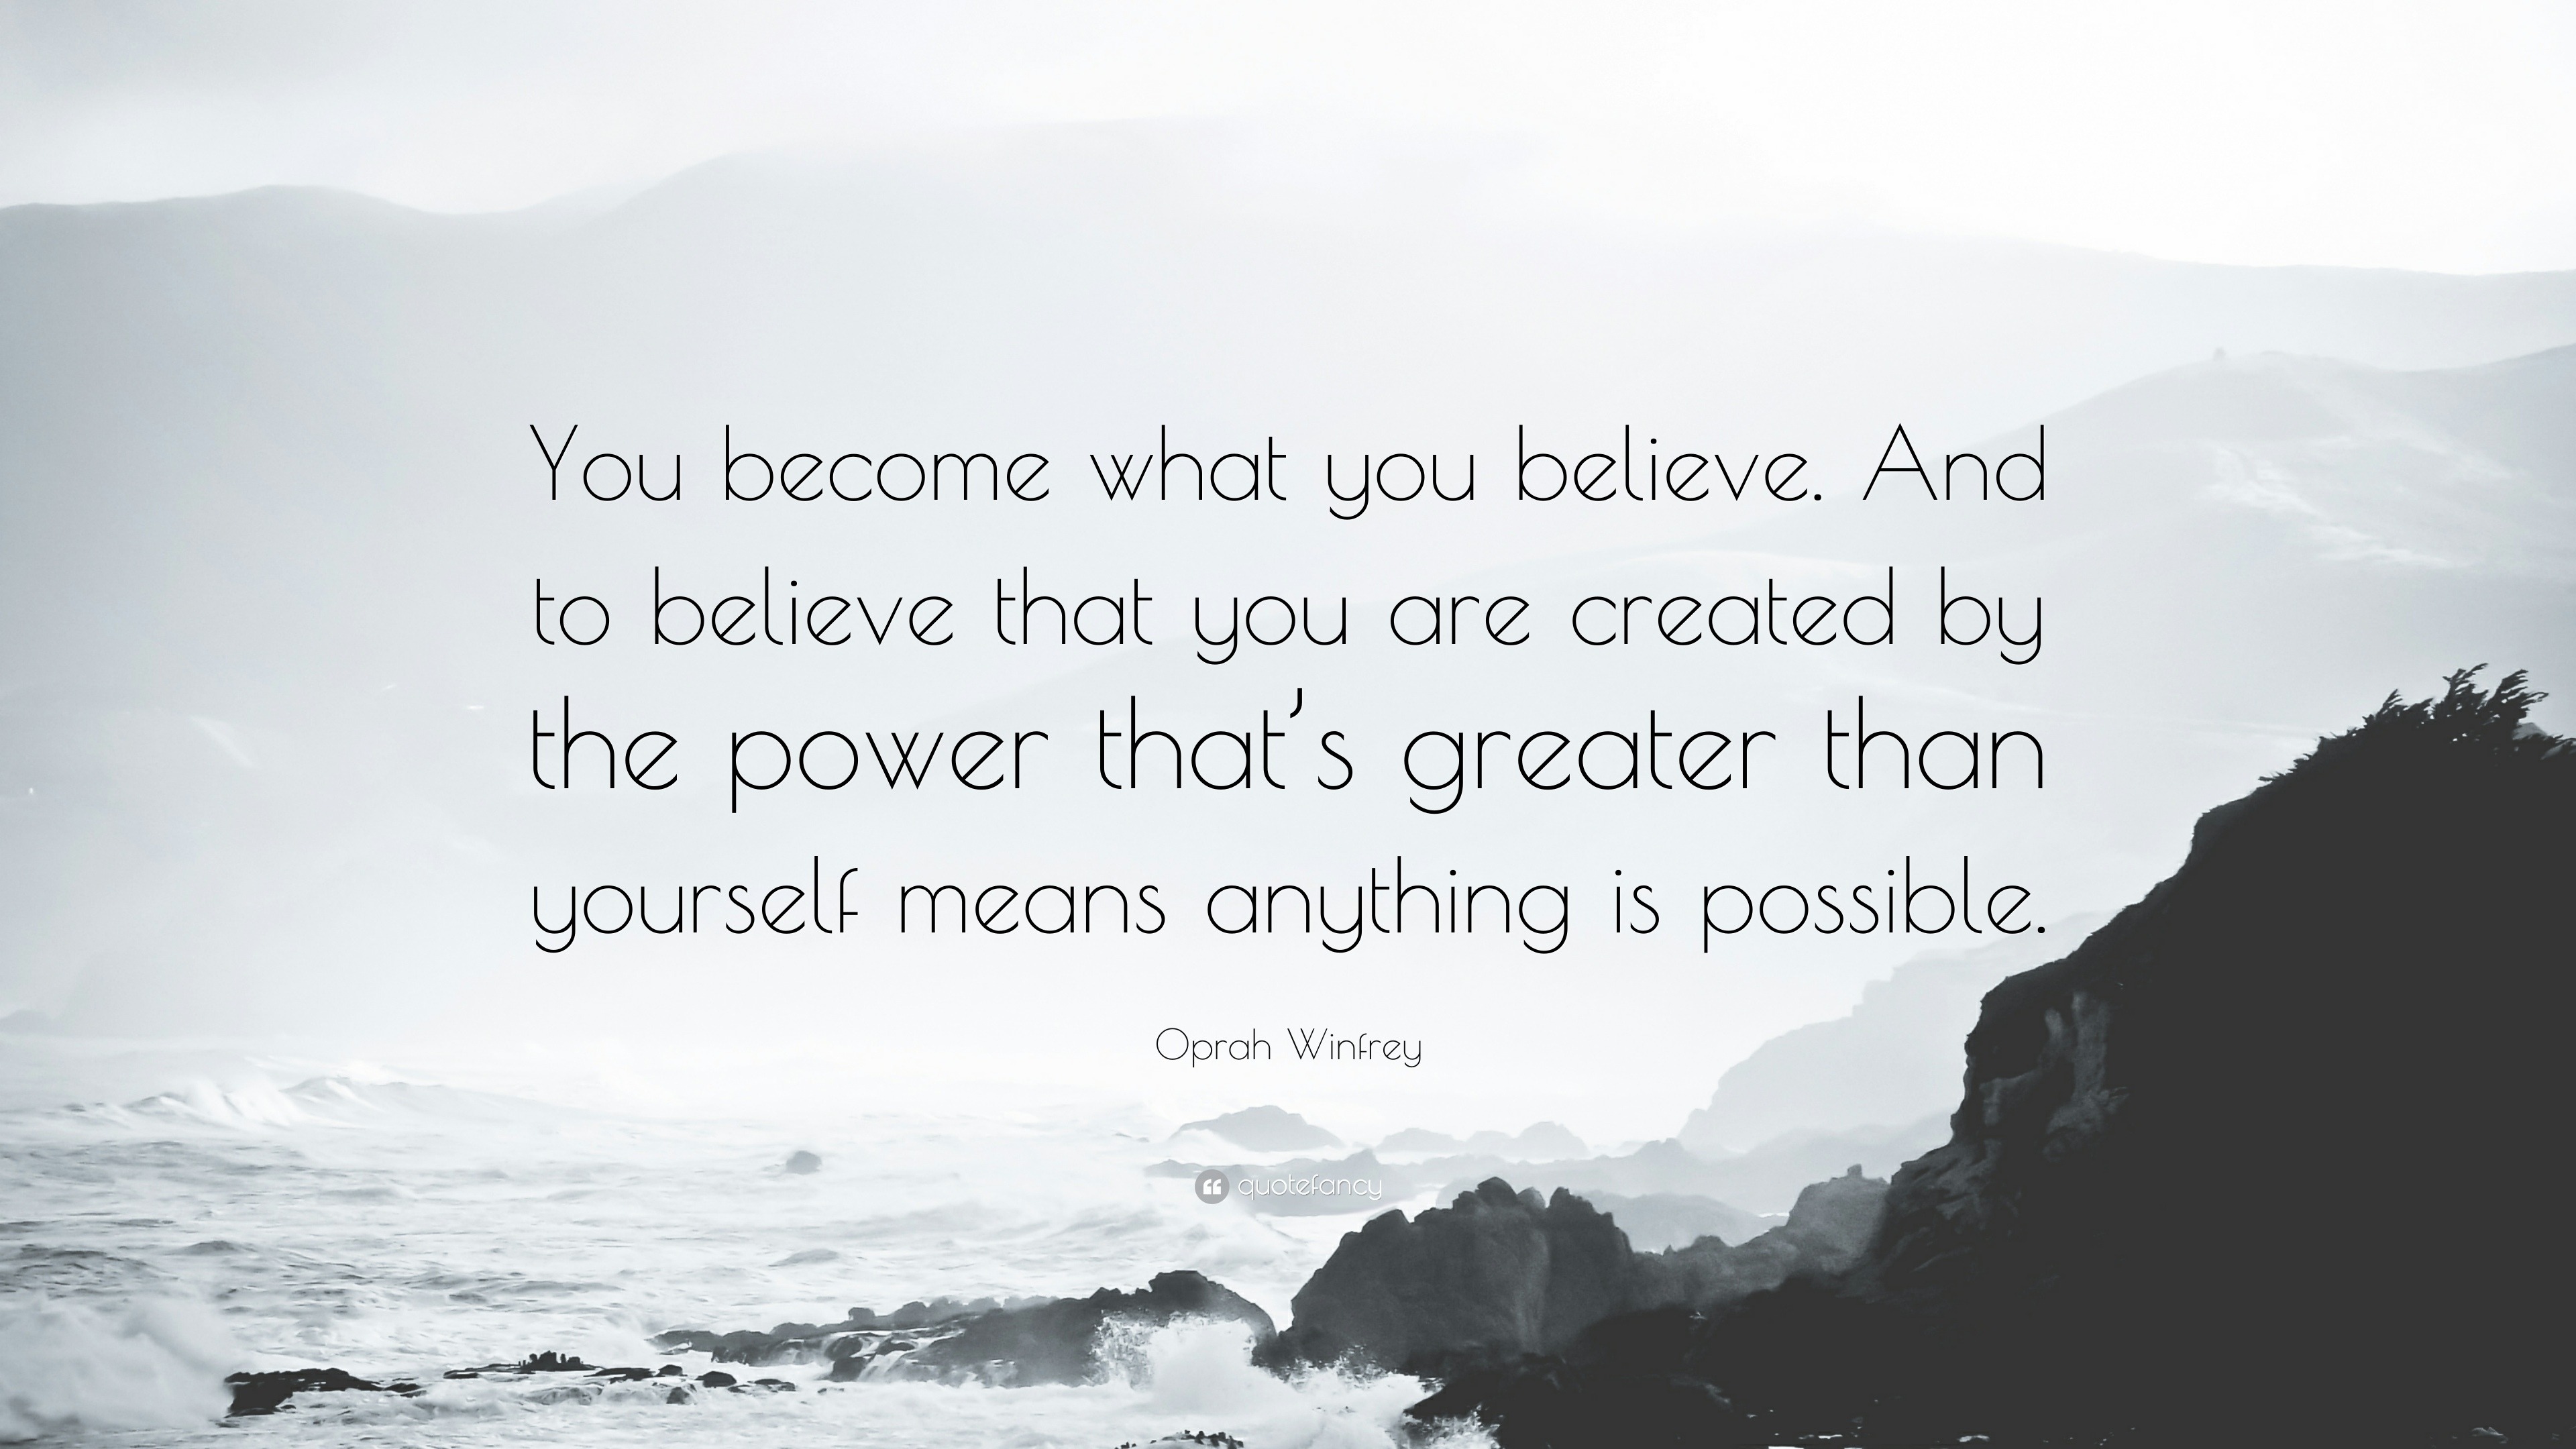 Oprah Winfrey Quote: “You become what you believe. And to believe that you  are created by the power that's greater than yourself means anythin...”